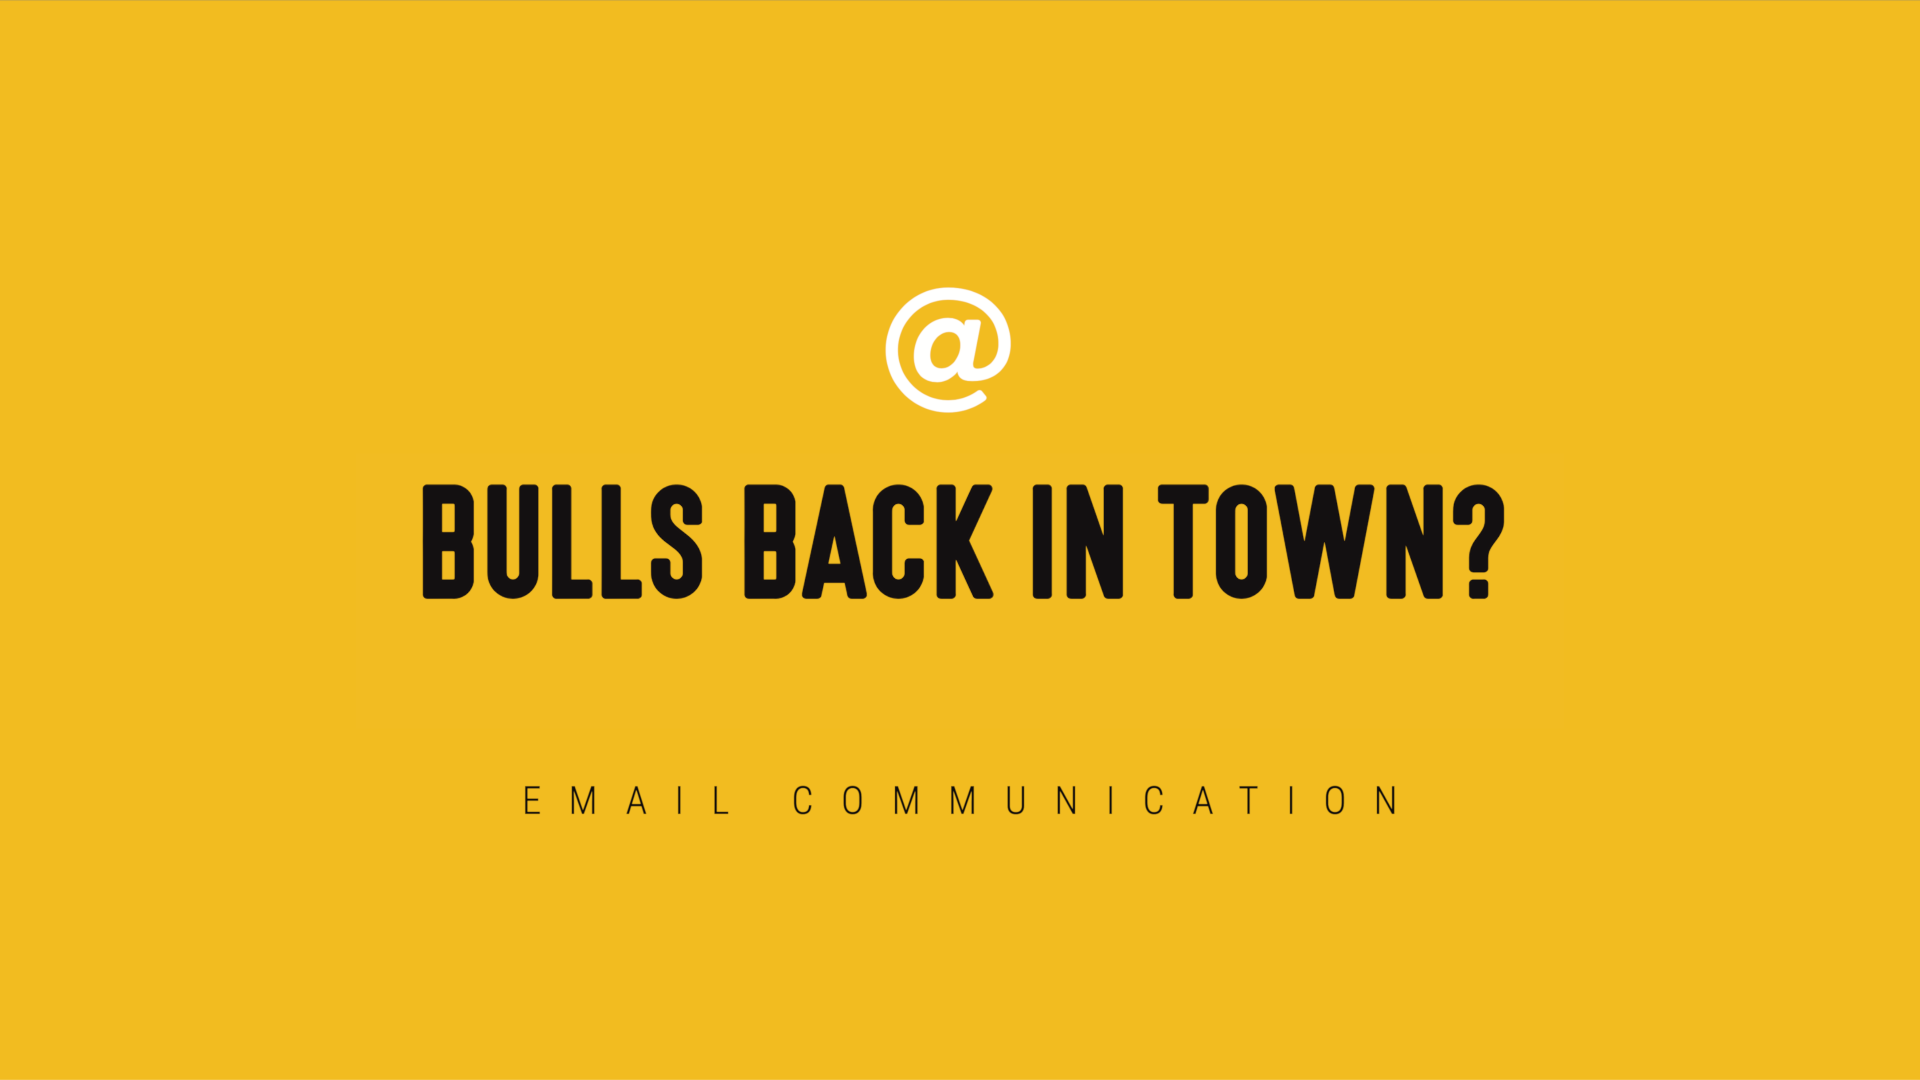 [NEW] Bulls Back in Town? Timely Email